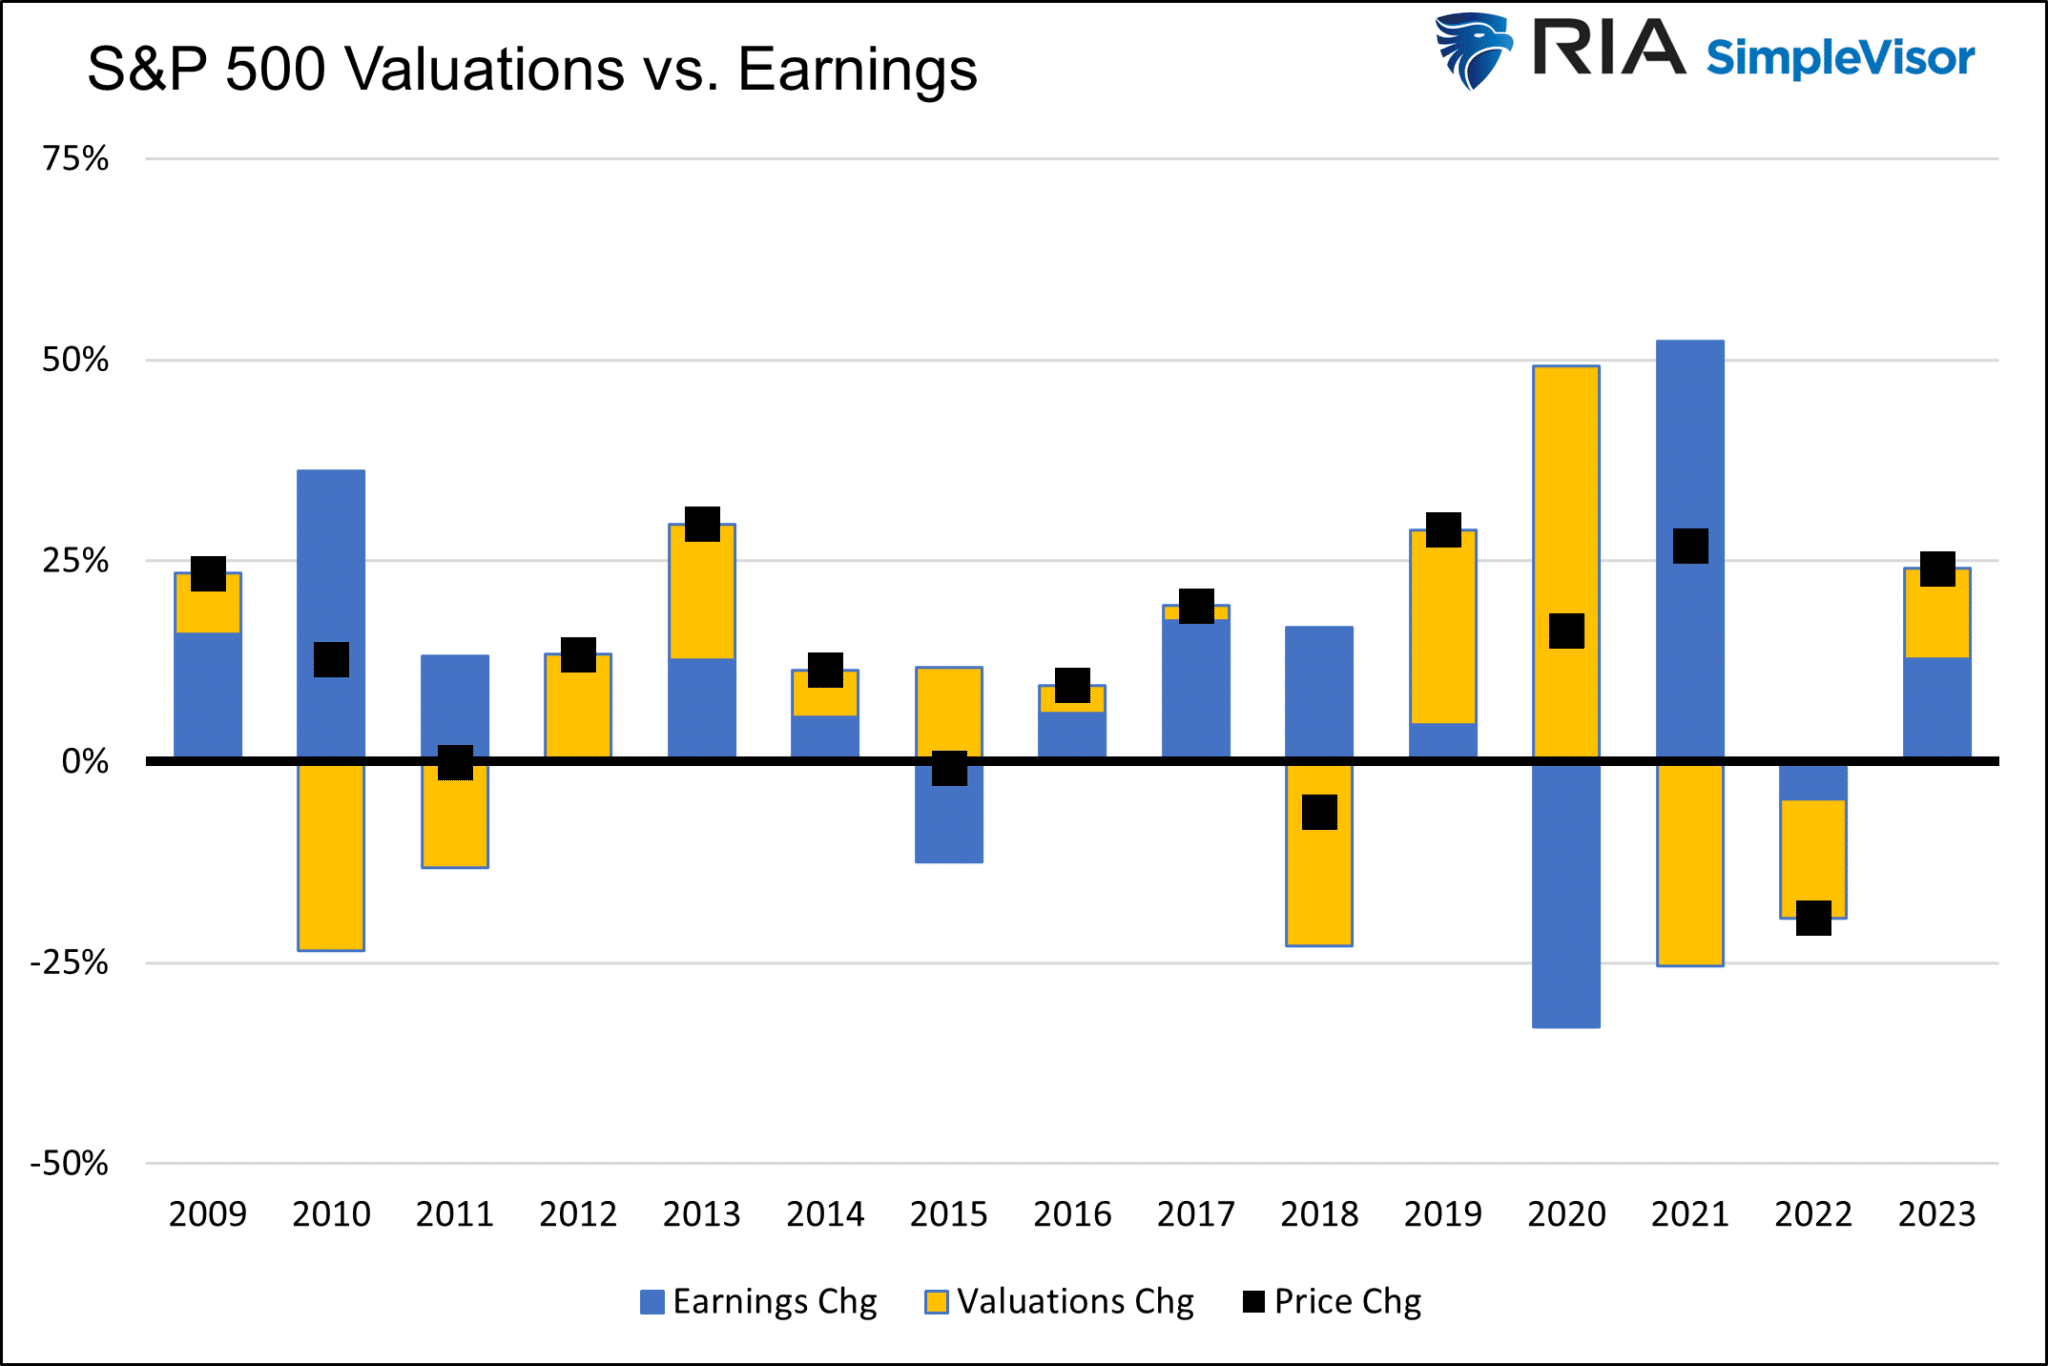 S&P 500-Valuations vs Earnings